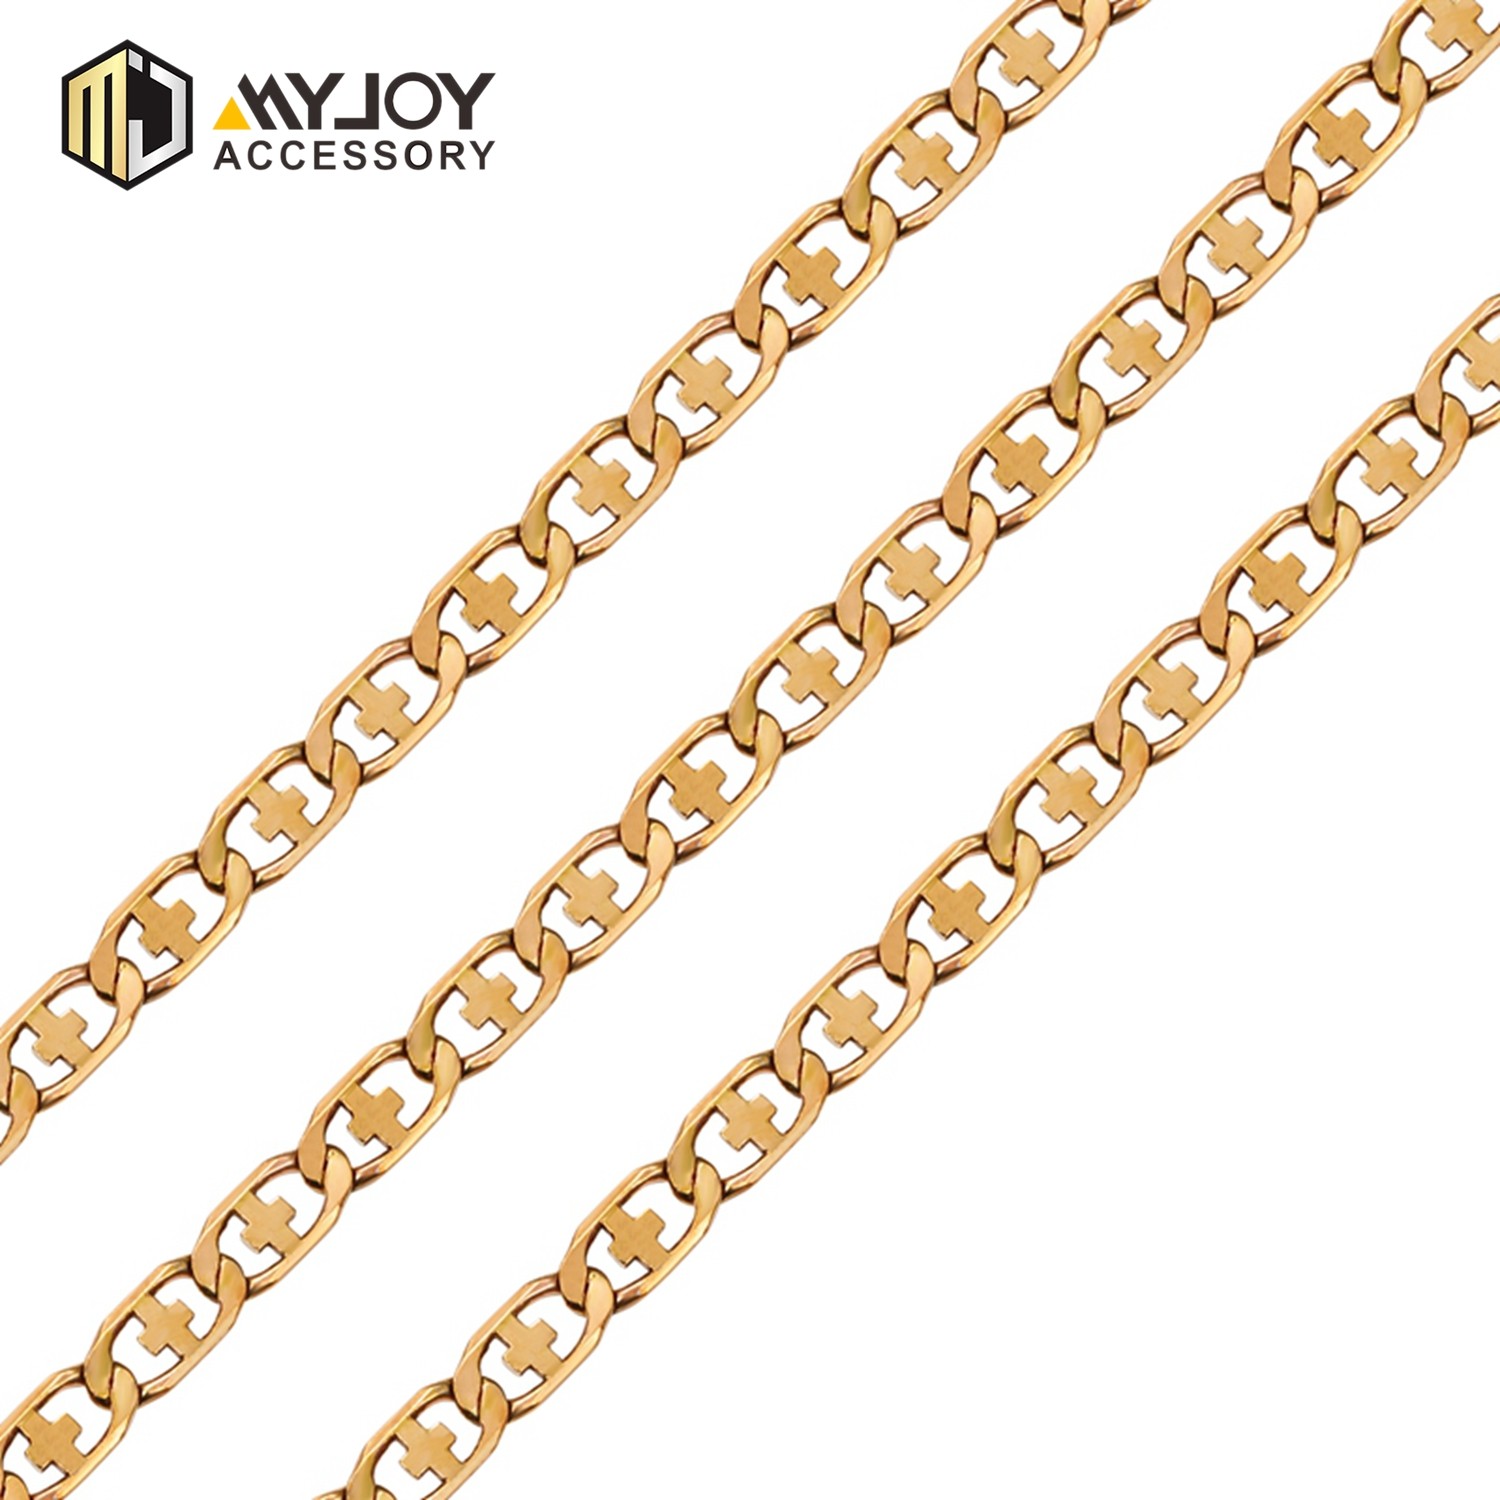 MYJOY chains purse chain for business for purses-3